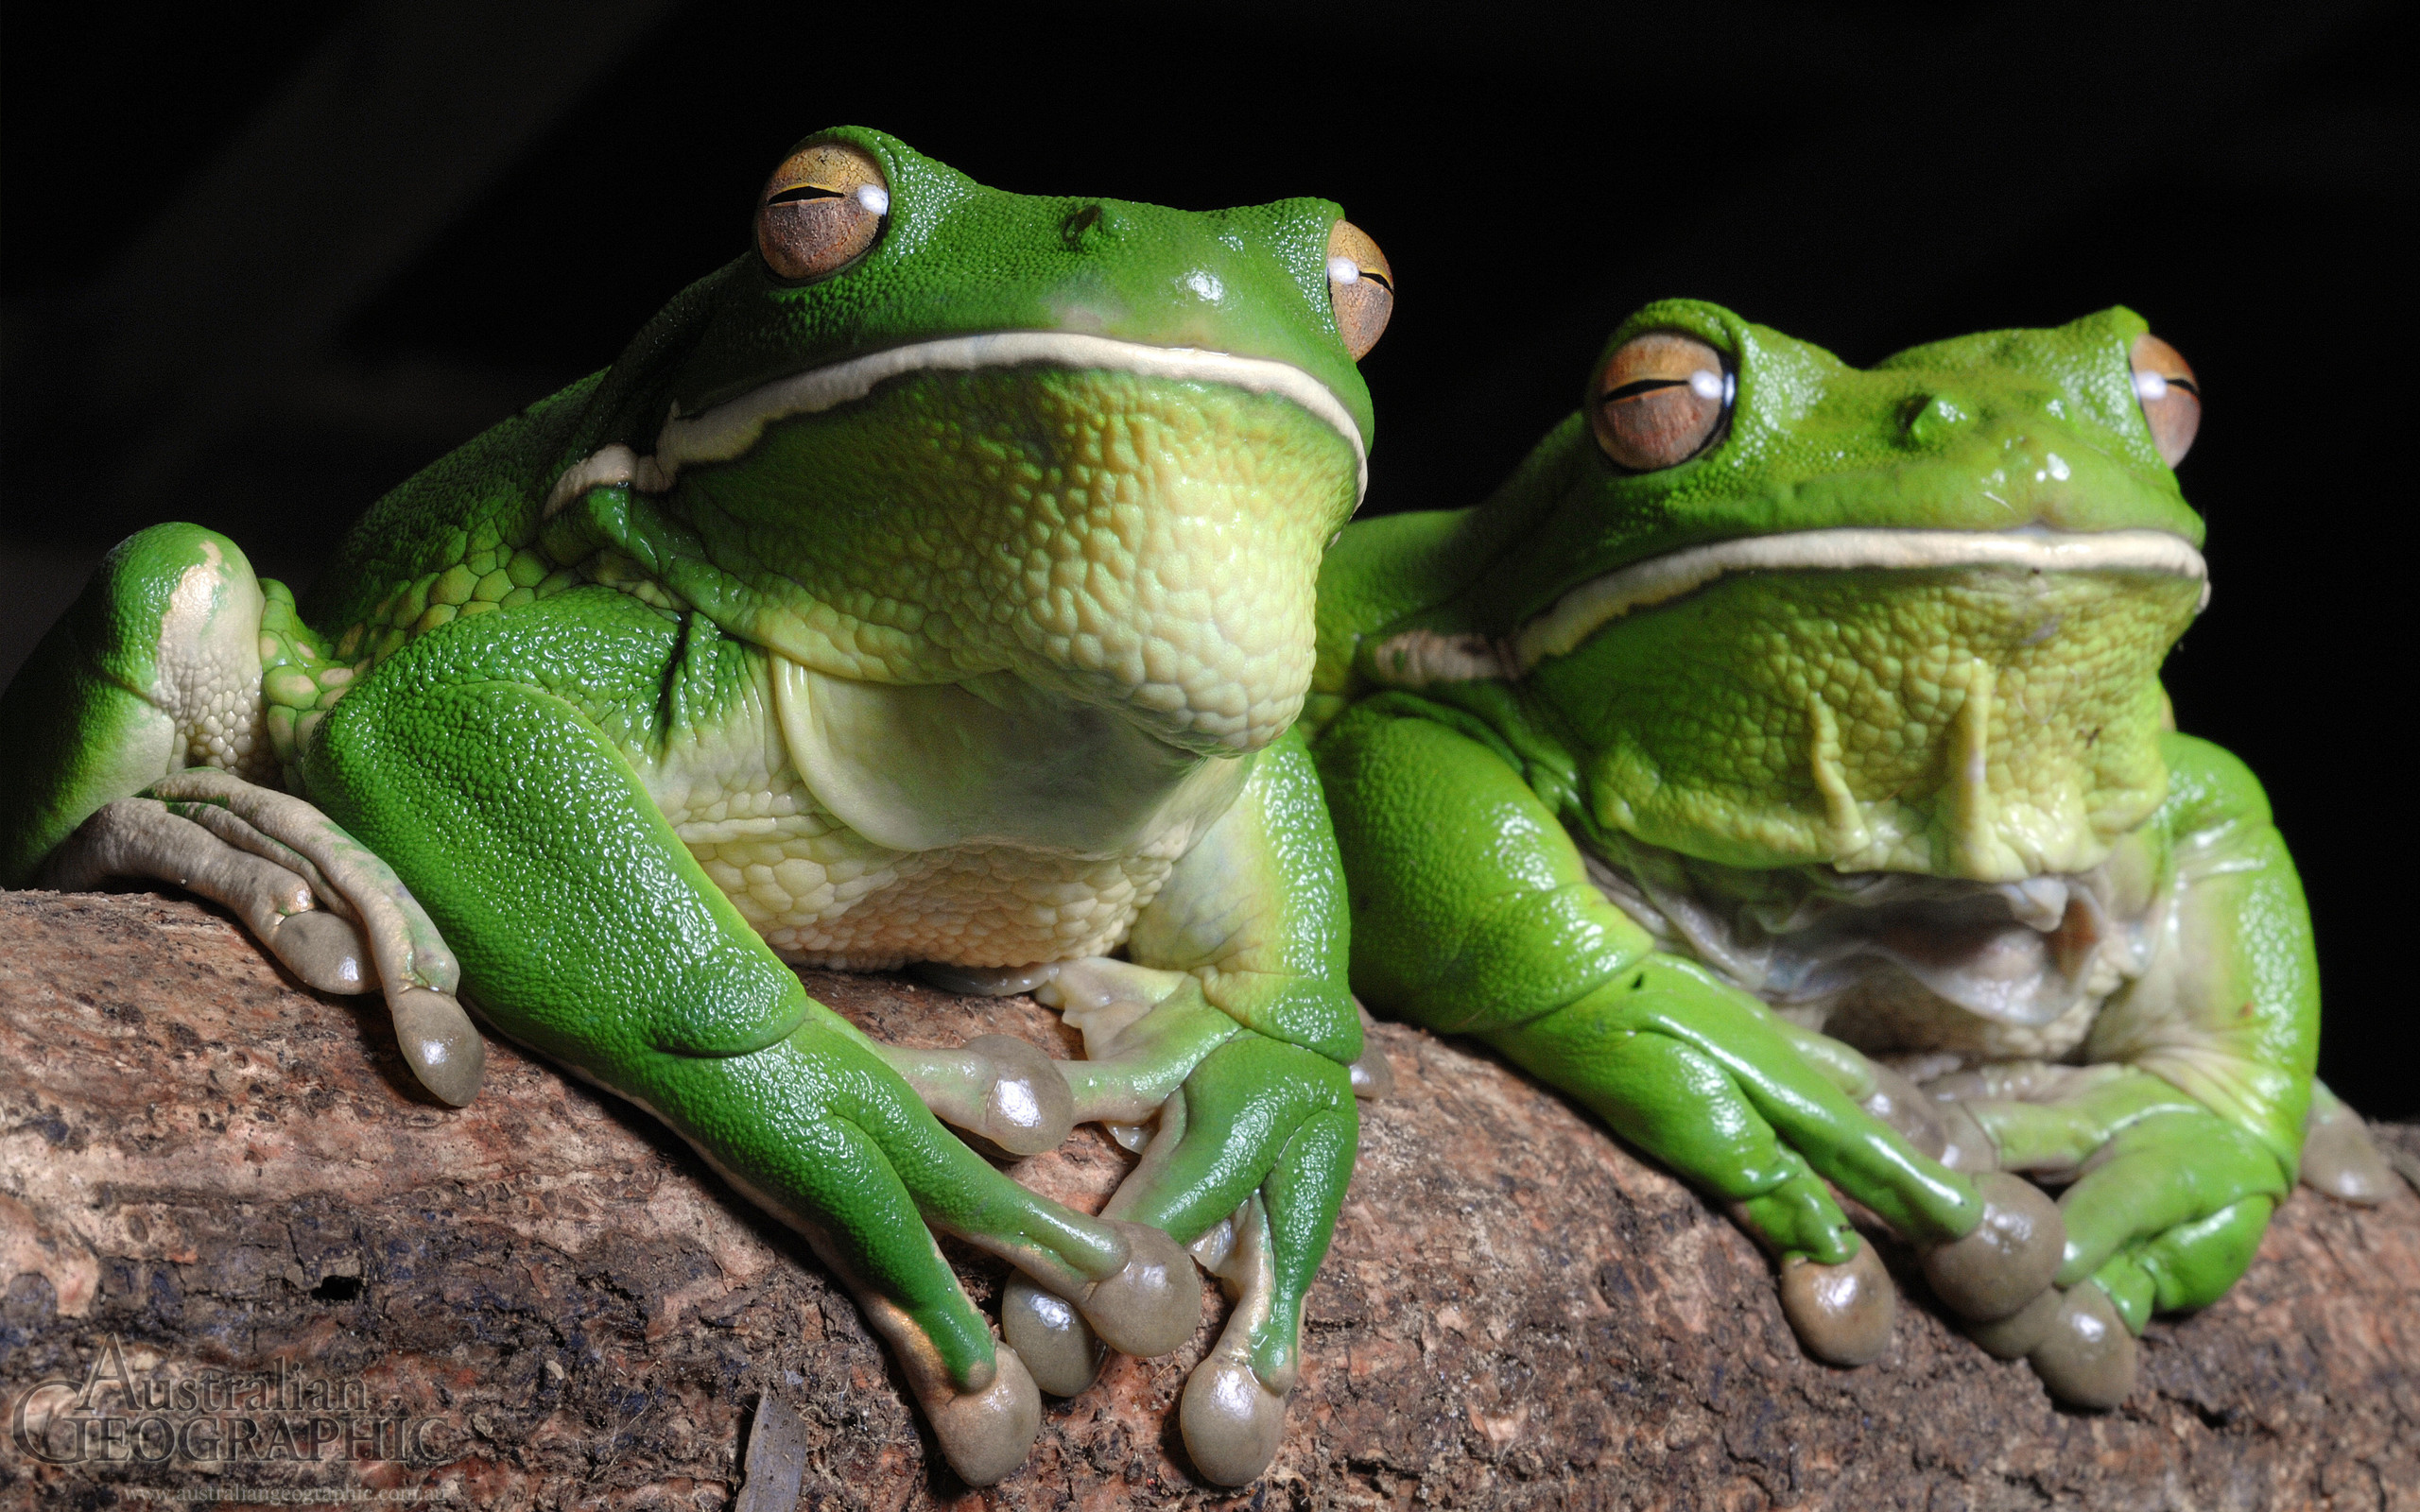 2560x1600 Wallpapers. Images of Australia: White-lipped tree frogs